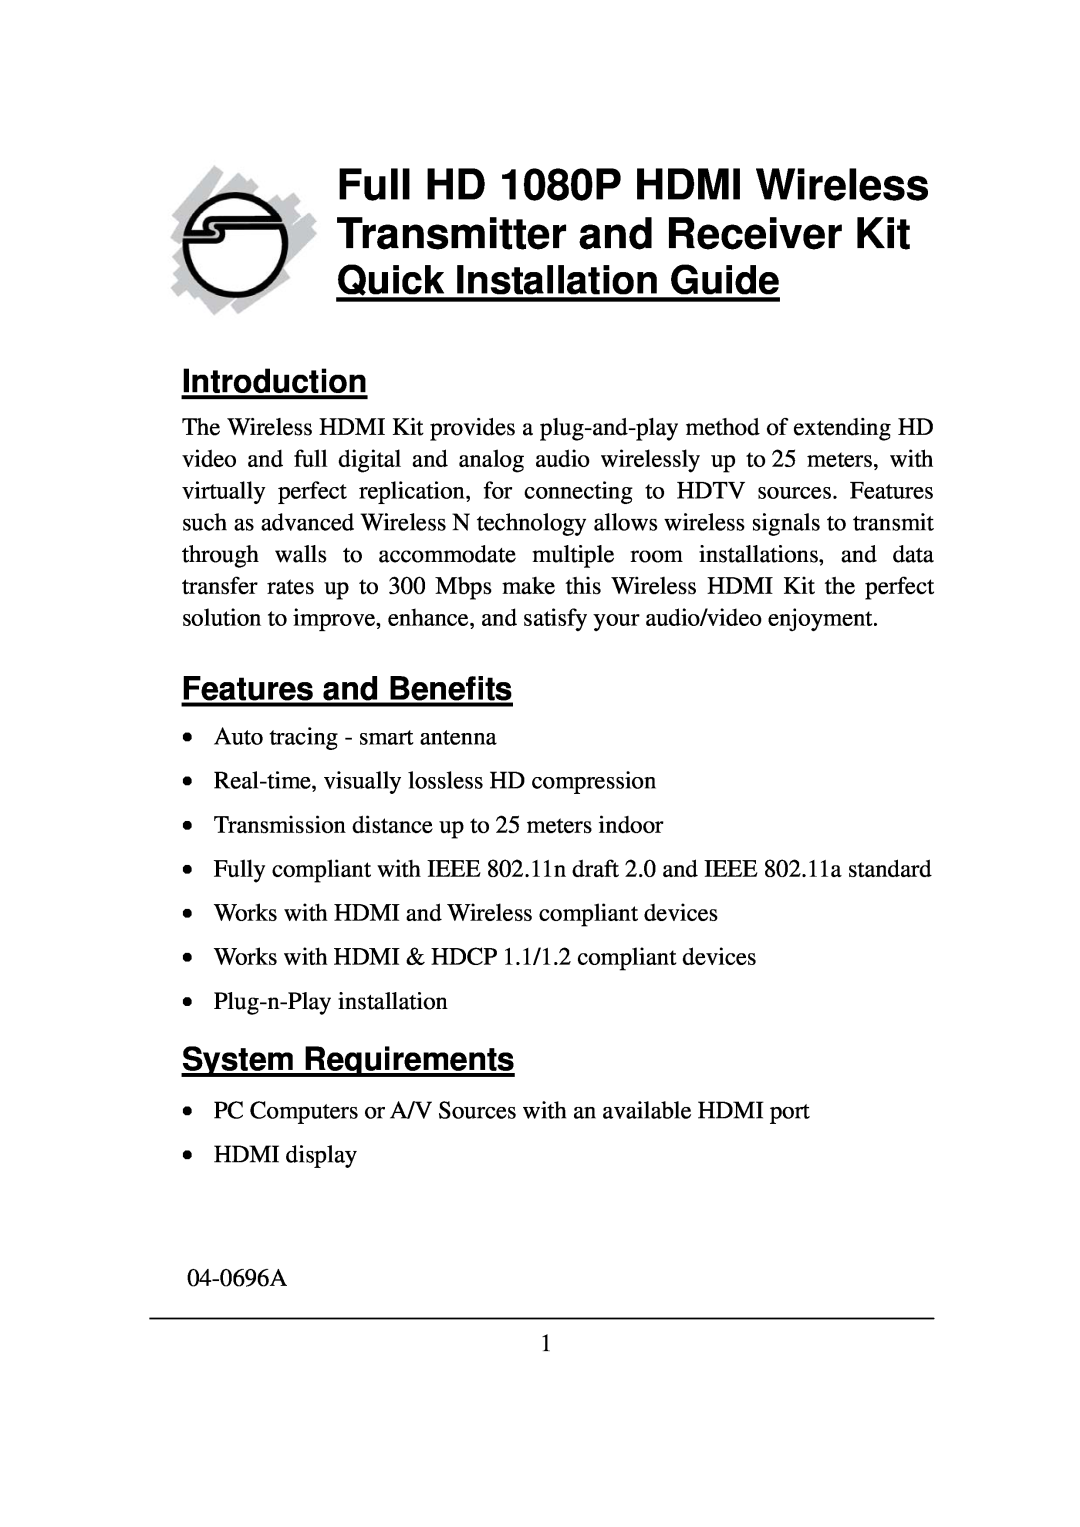 SIIG 671-121 manual Introduction, Features and Benefits, System Requirements, Quick Installation Guide 